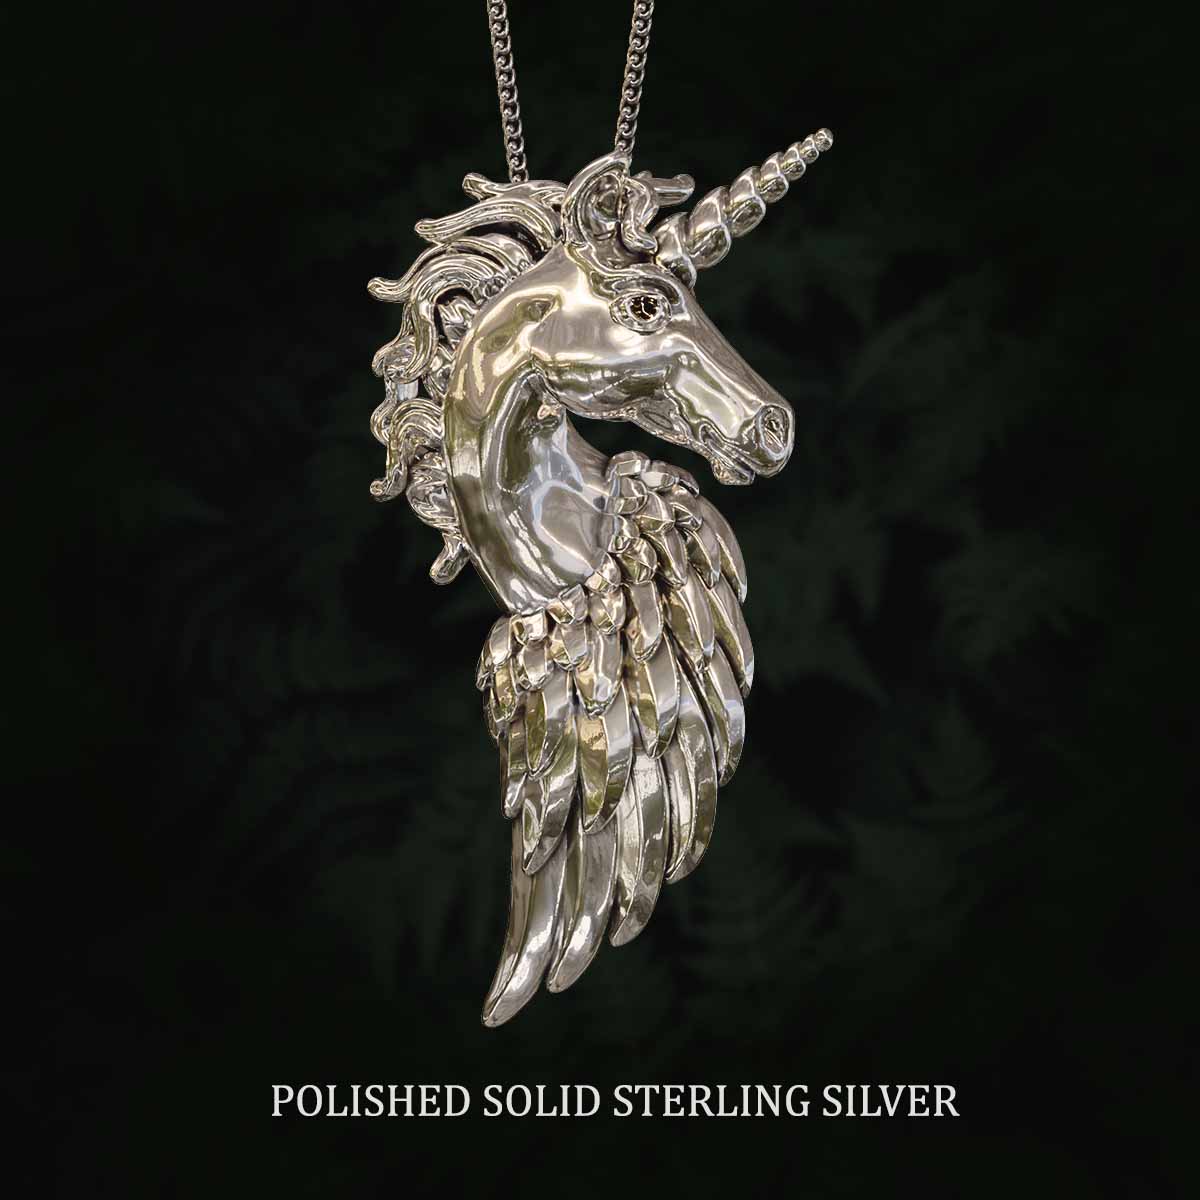     Polished-Solid-Sterling-Silver-Unicorn-Pegasus-Pendant-Jewelry-For-Necklace